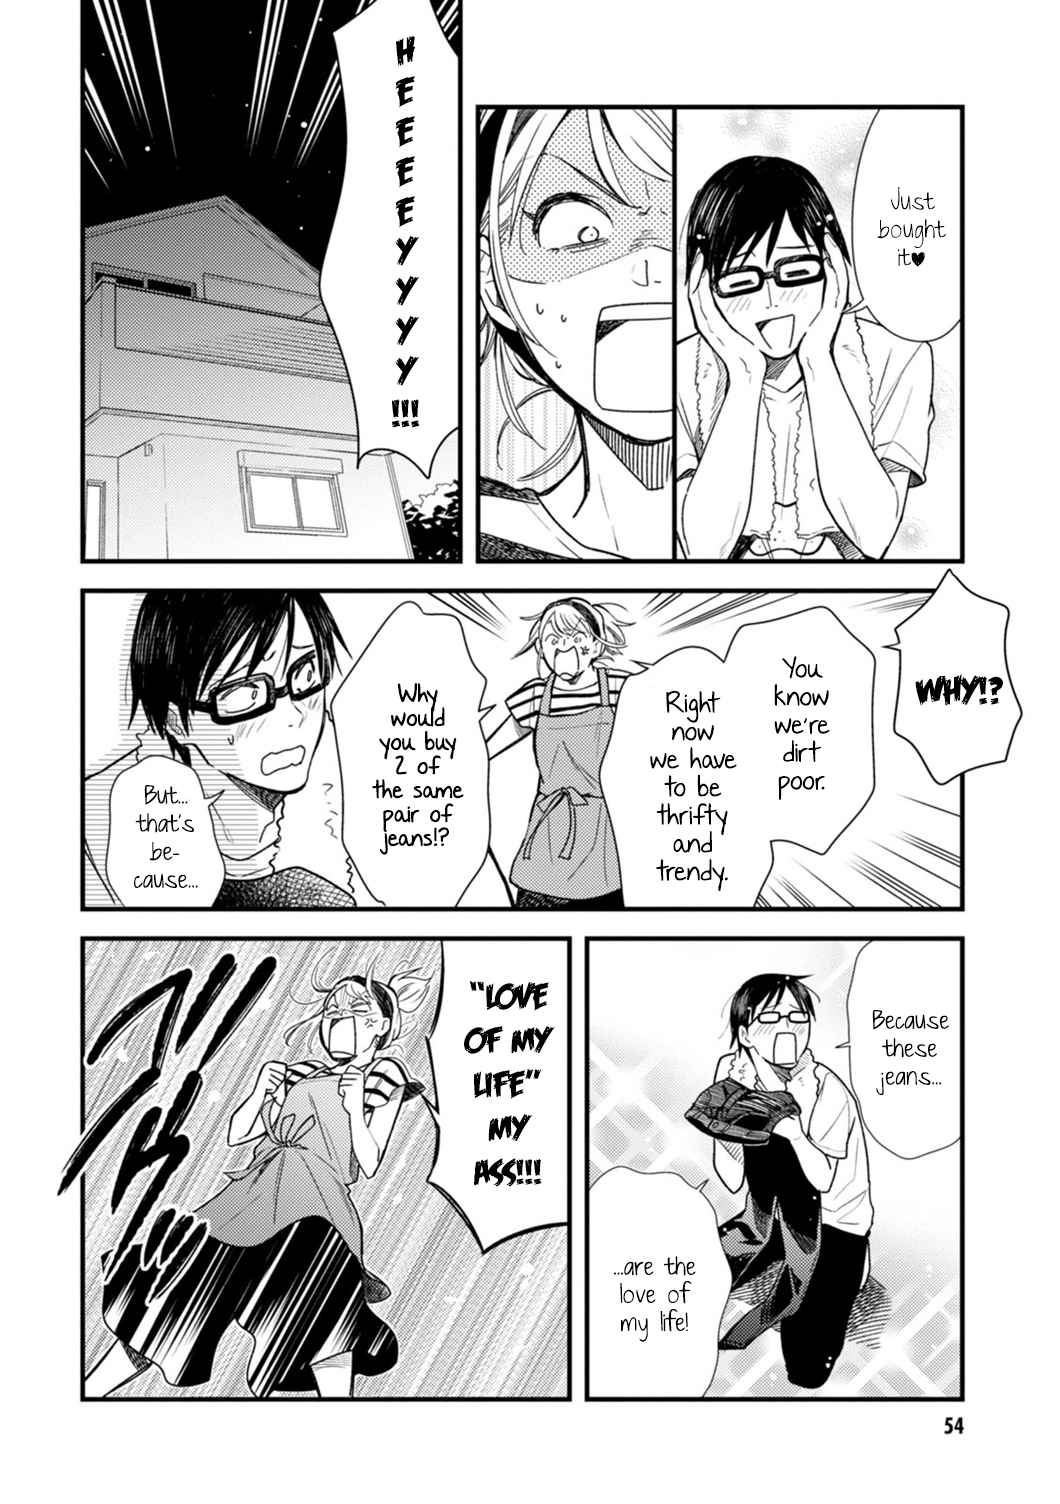 If You're Gonna Dress Up, Do It Like This Vol. 1 Ch. 3